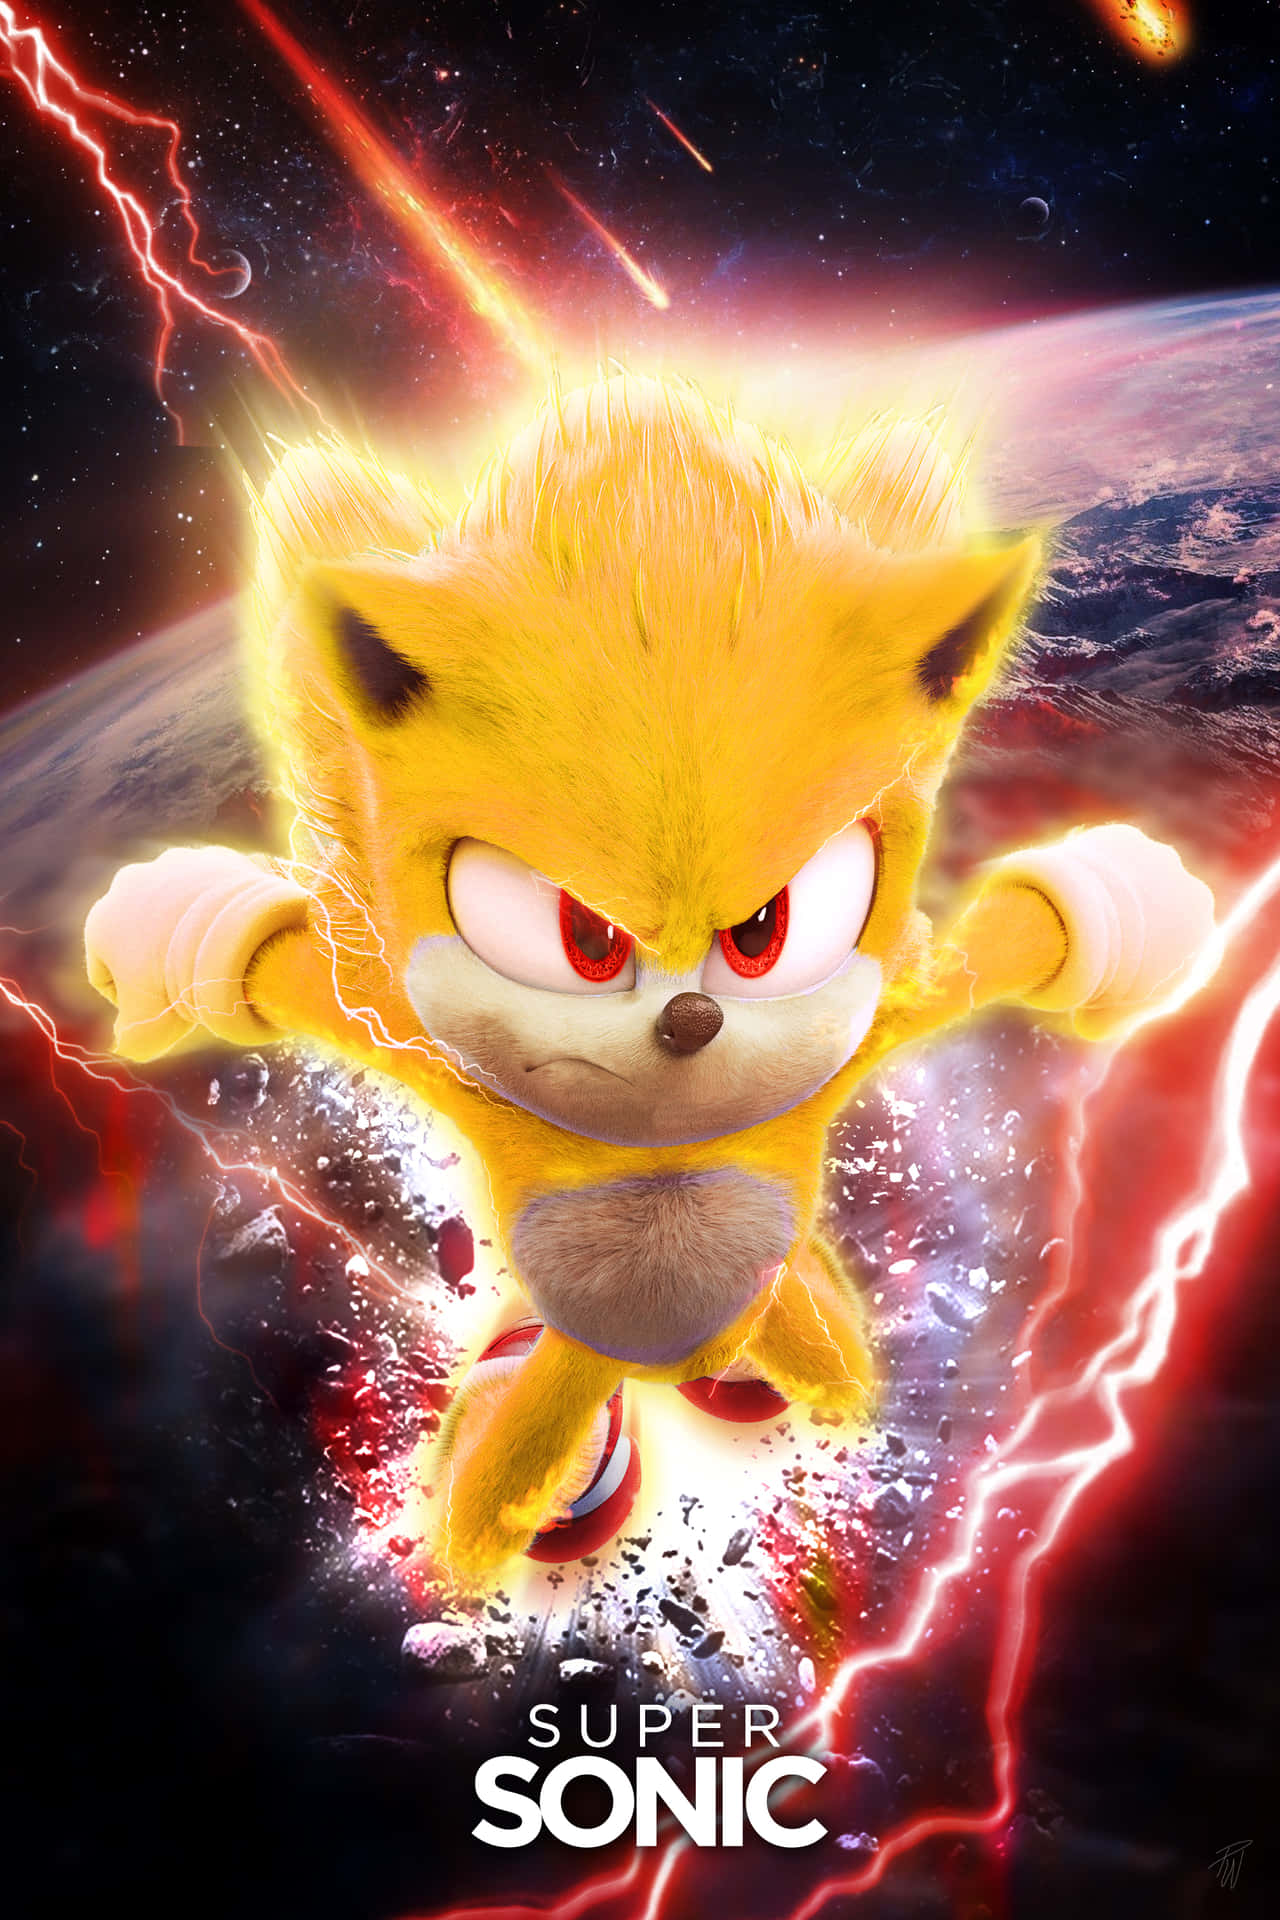 "Run at the speed of sound with Super Sonic!" Wallpaper